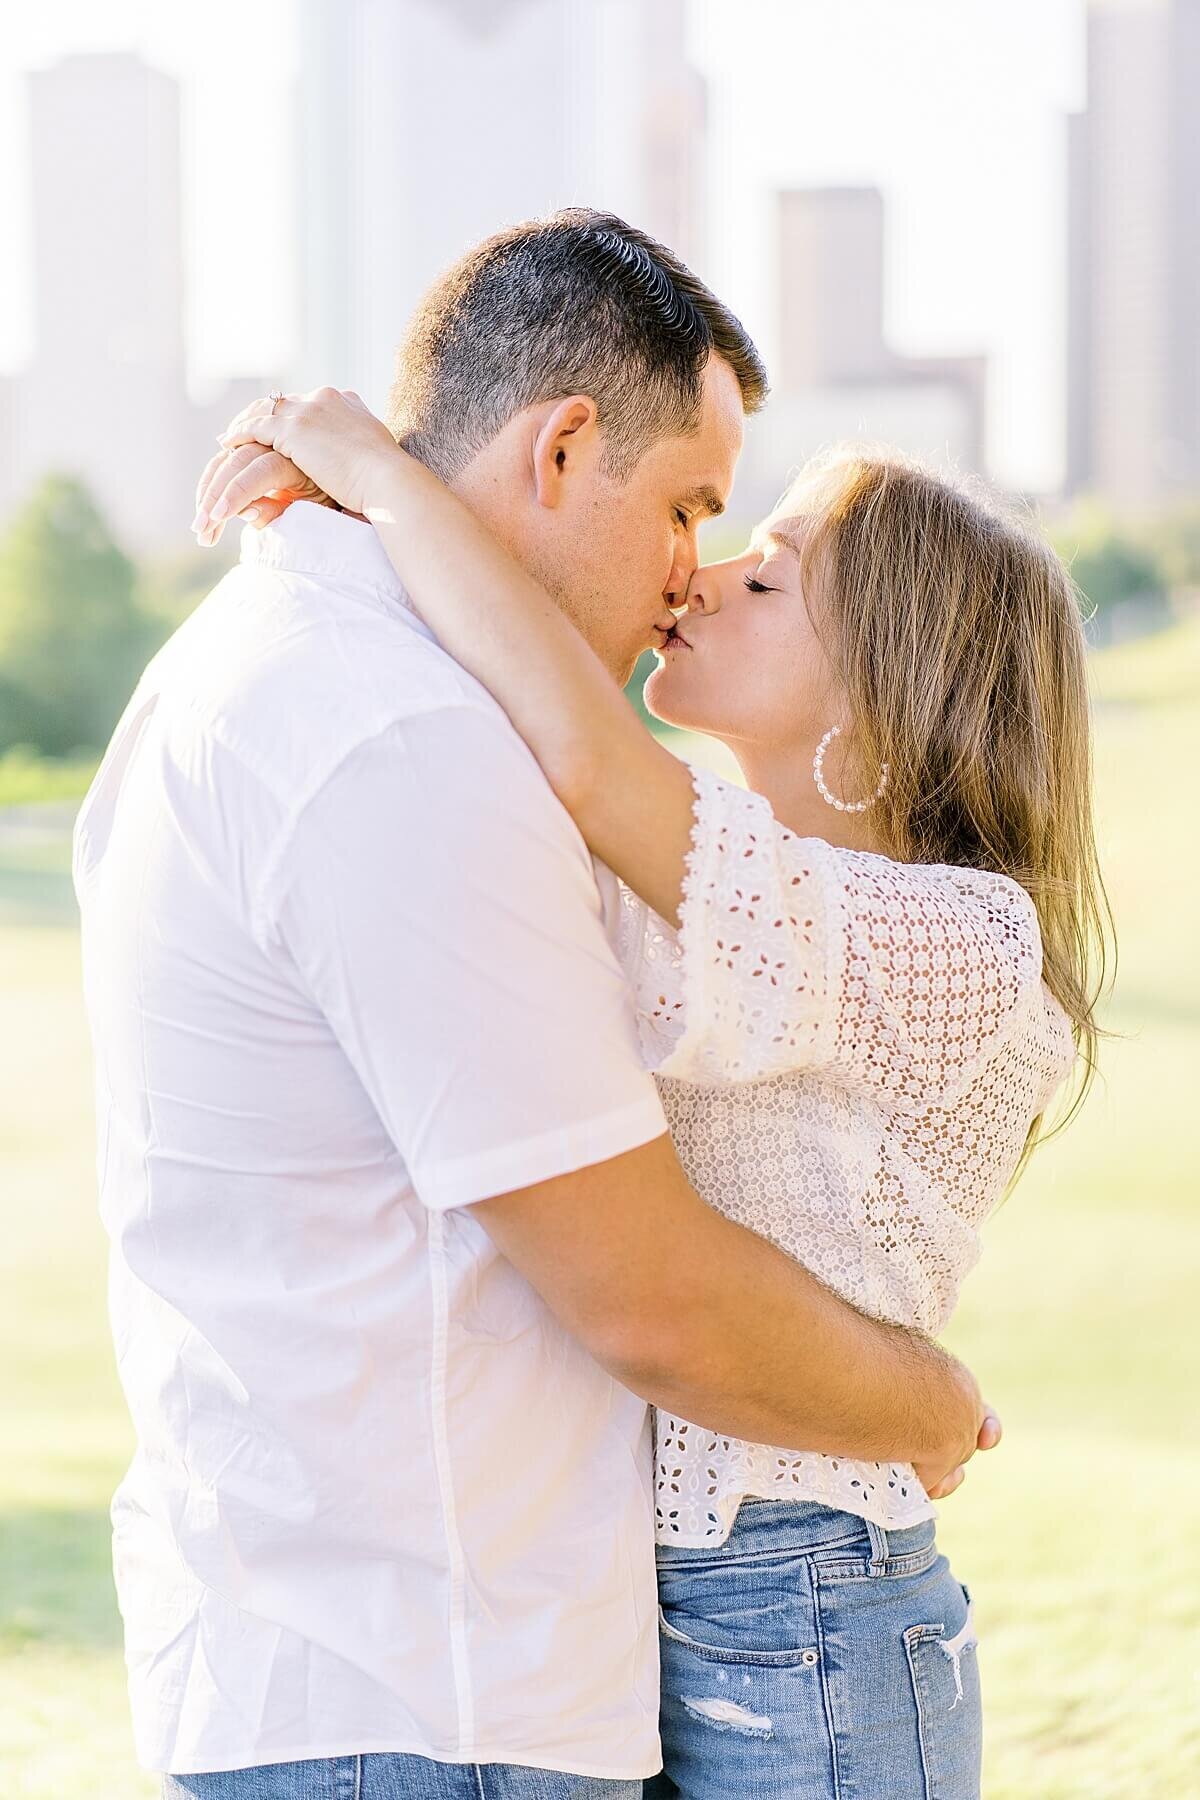 McGovern-Centennial-Gardens-Hermann-Park-Engagement-Session-Alicia-Yarrish-Photography_0021